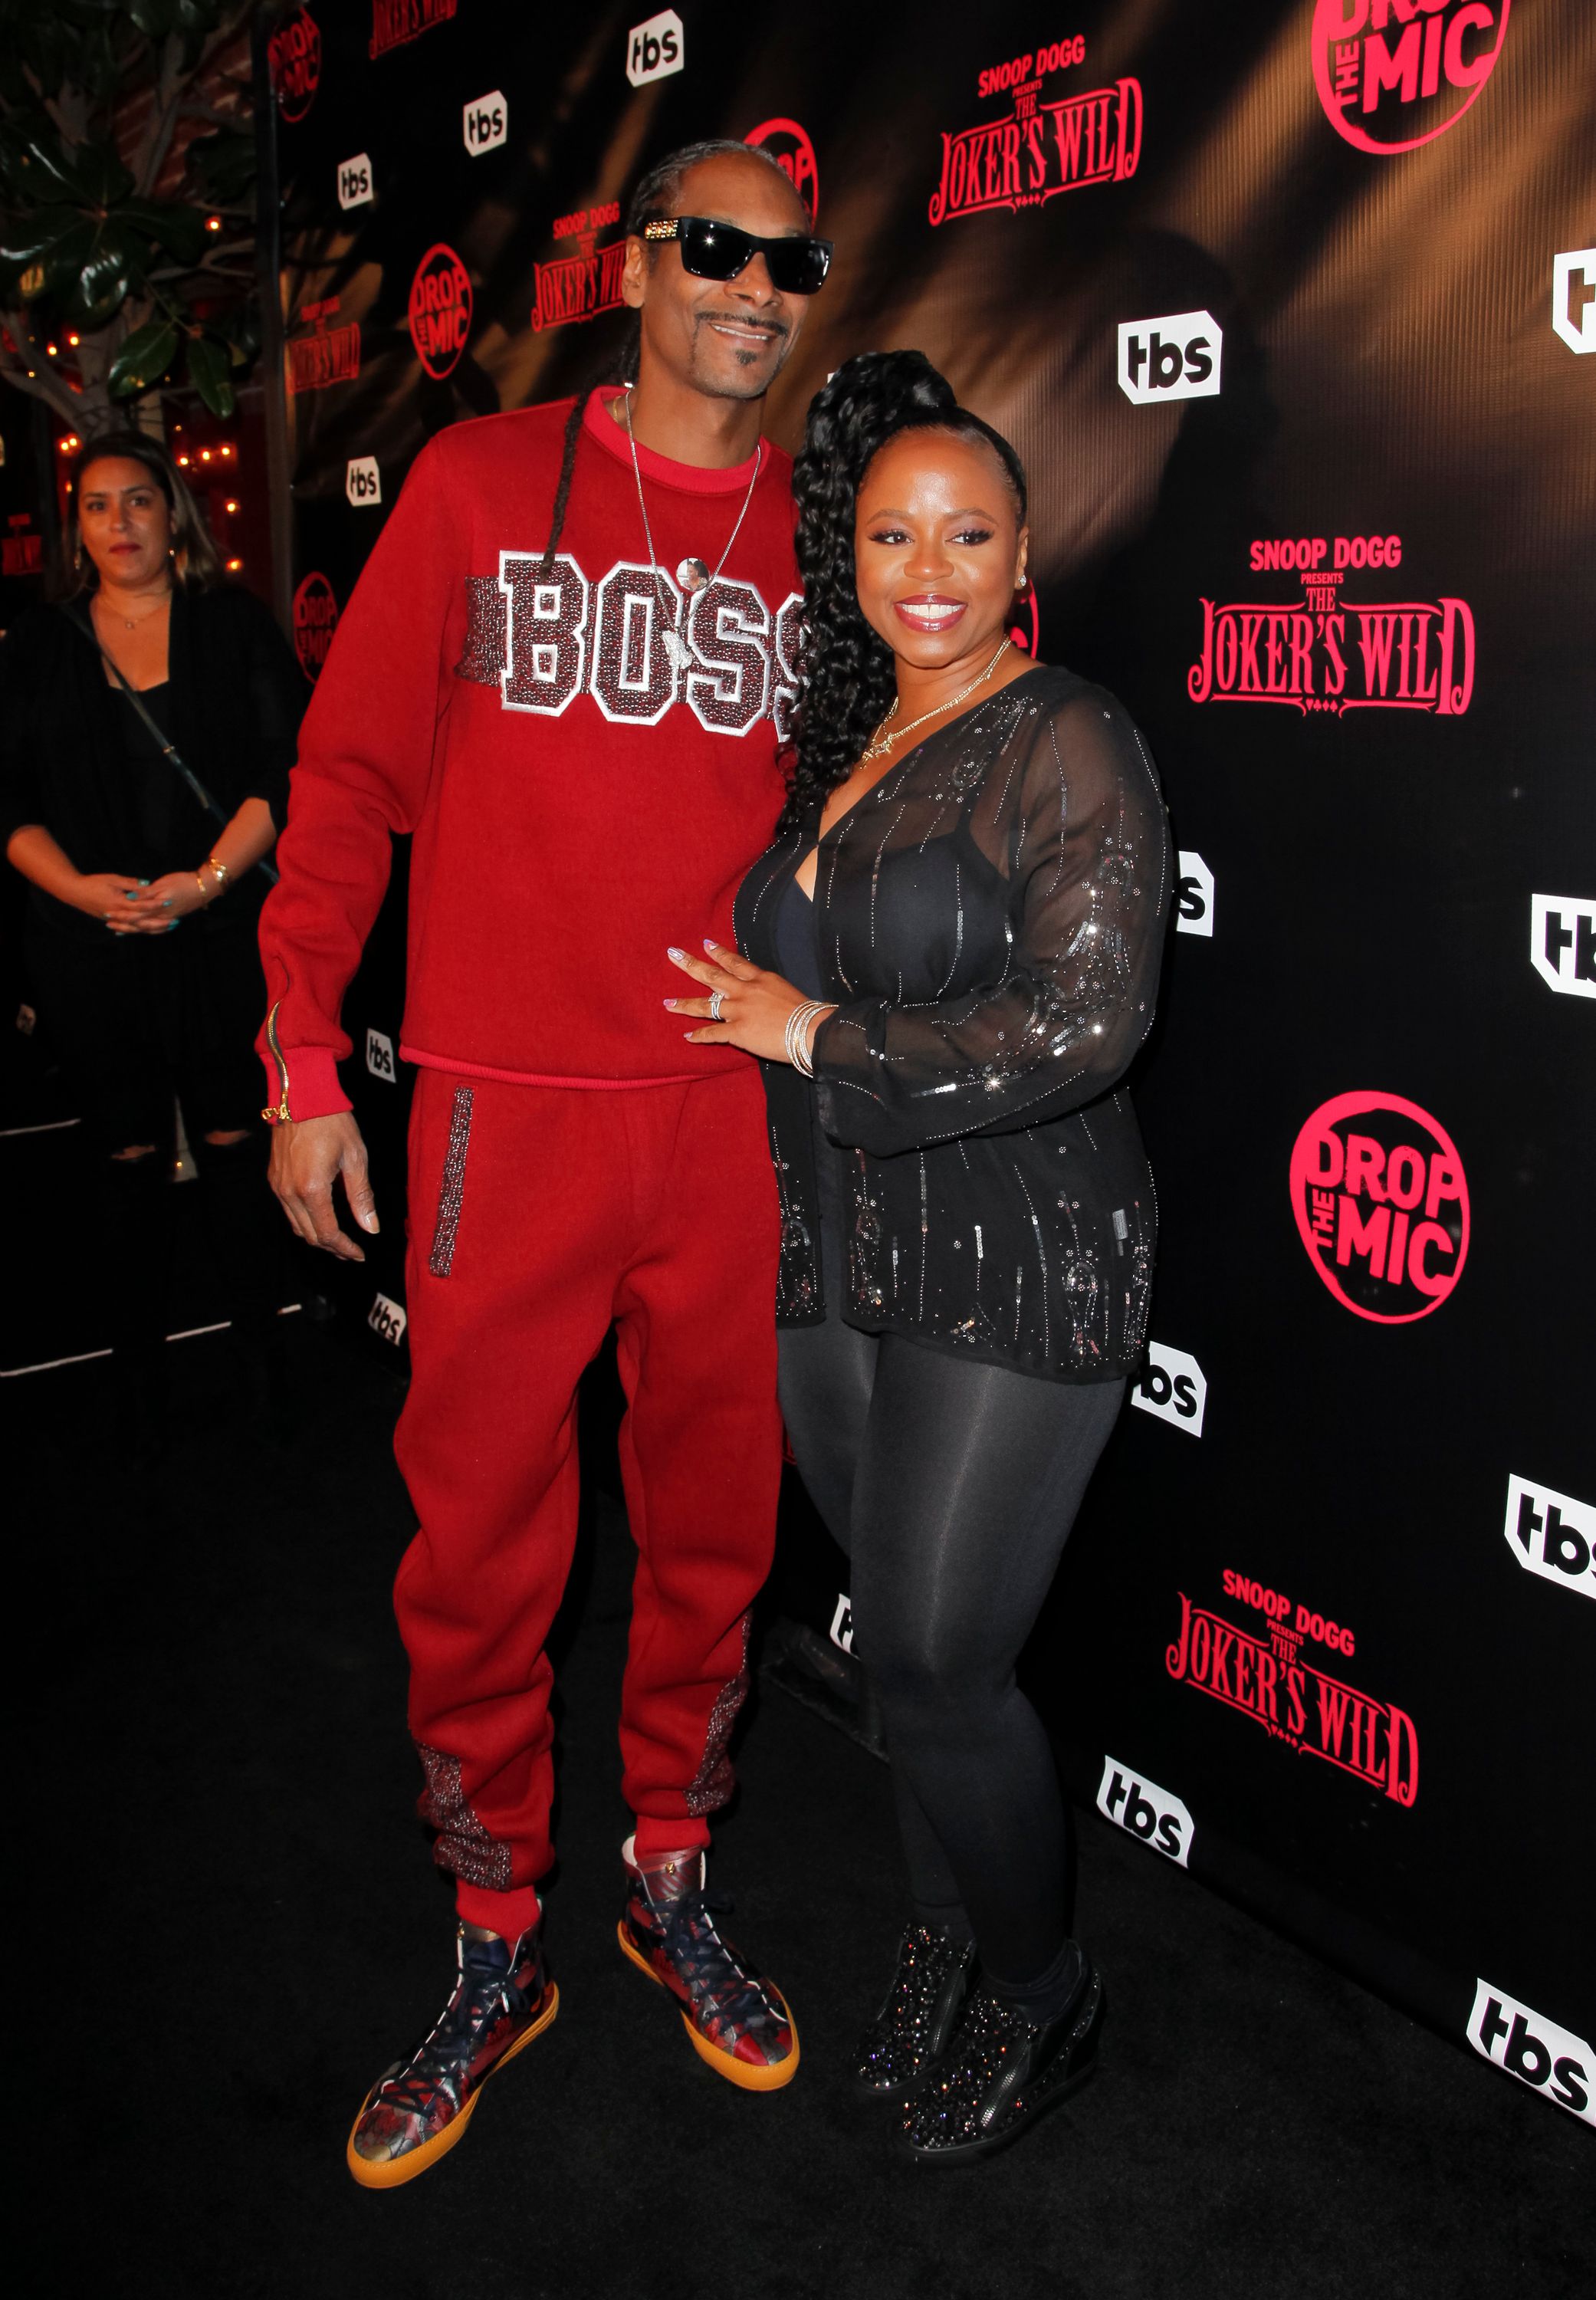 Snoop Dogg and Shante Broadus at the premiere for TBS's 'Drop The Mic' and 'The Joker's Wild' on October 11, 2017 | Photo: Getty Images